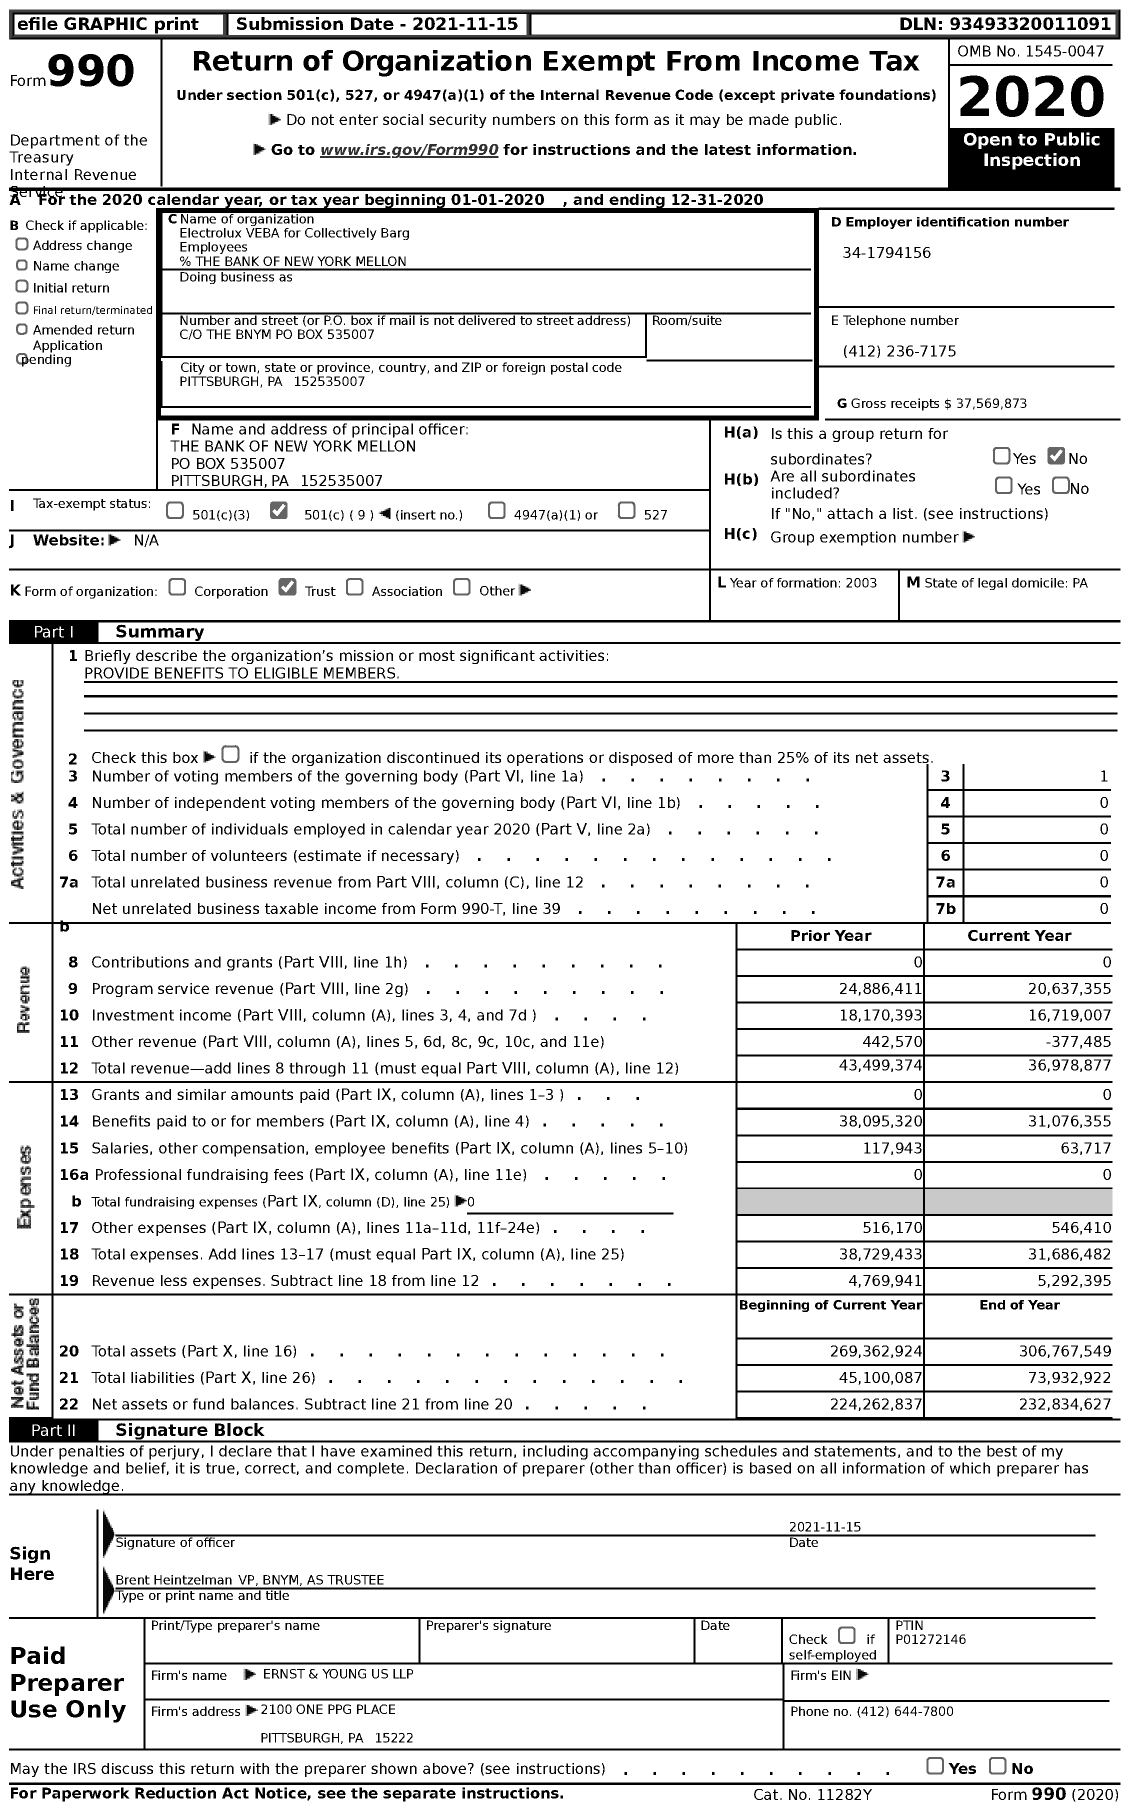 Image of first page of 2020 Form 990 for Electrolux VEBA for Collectively Barg Employees